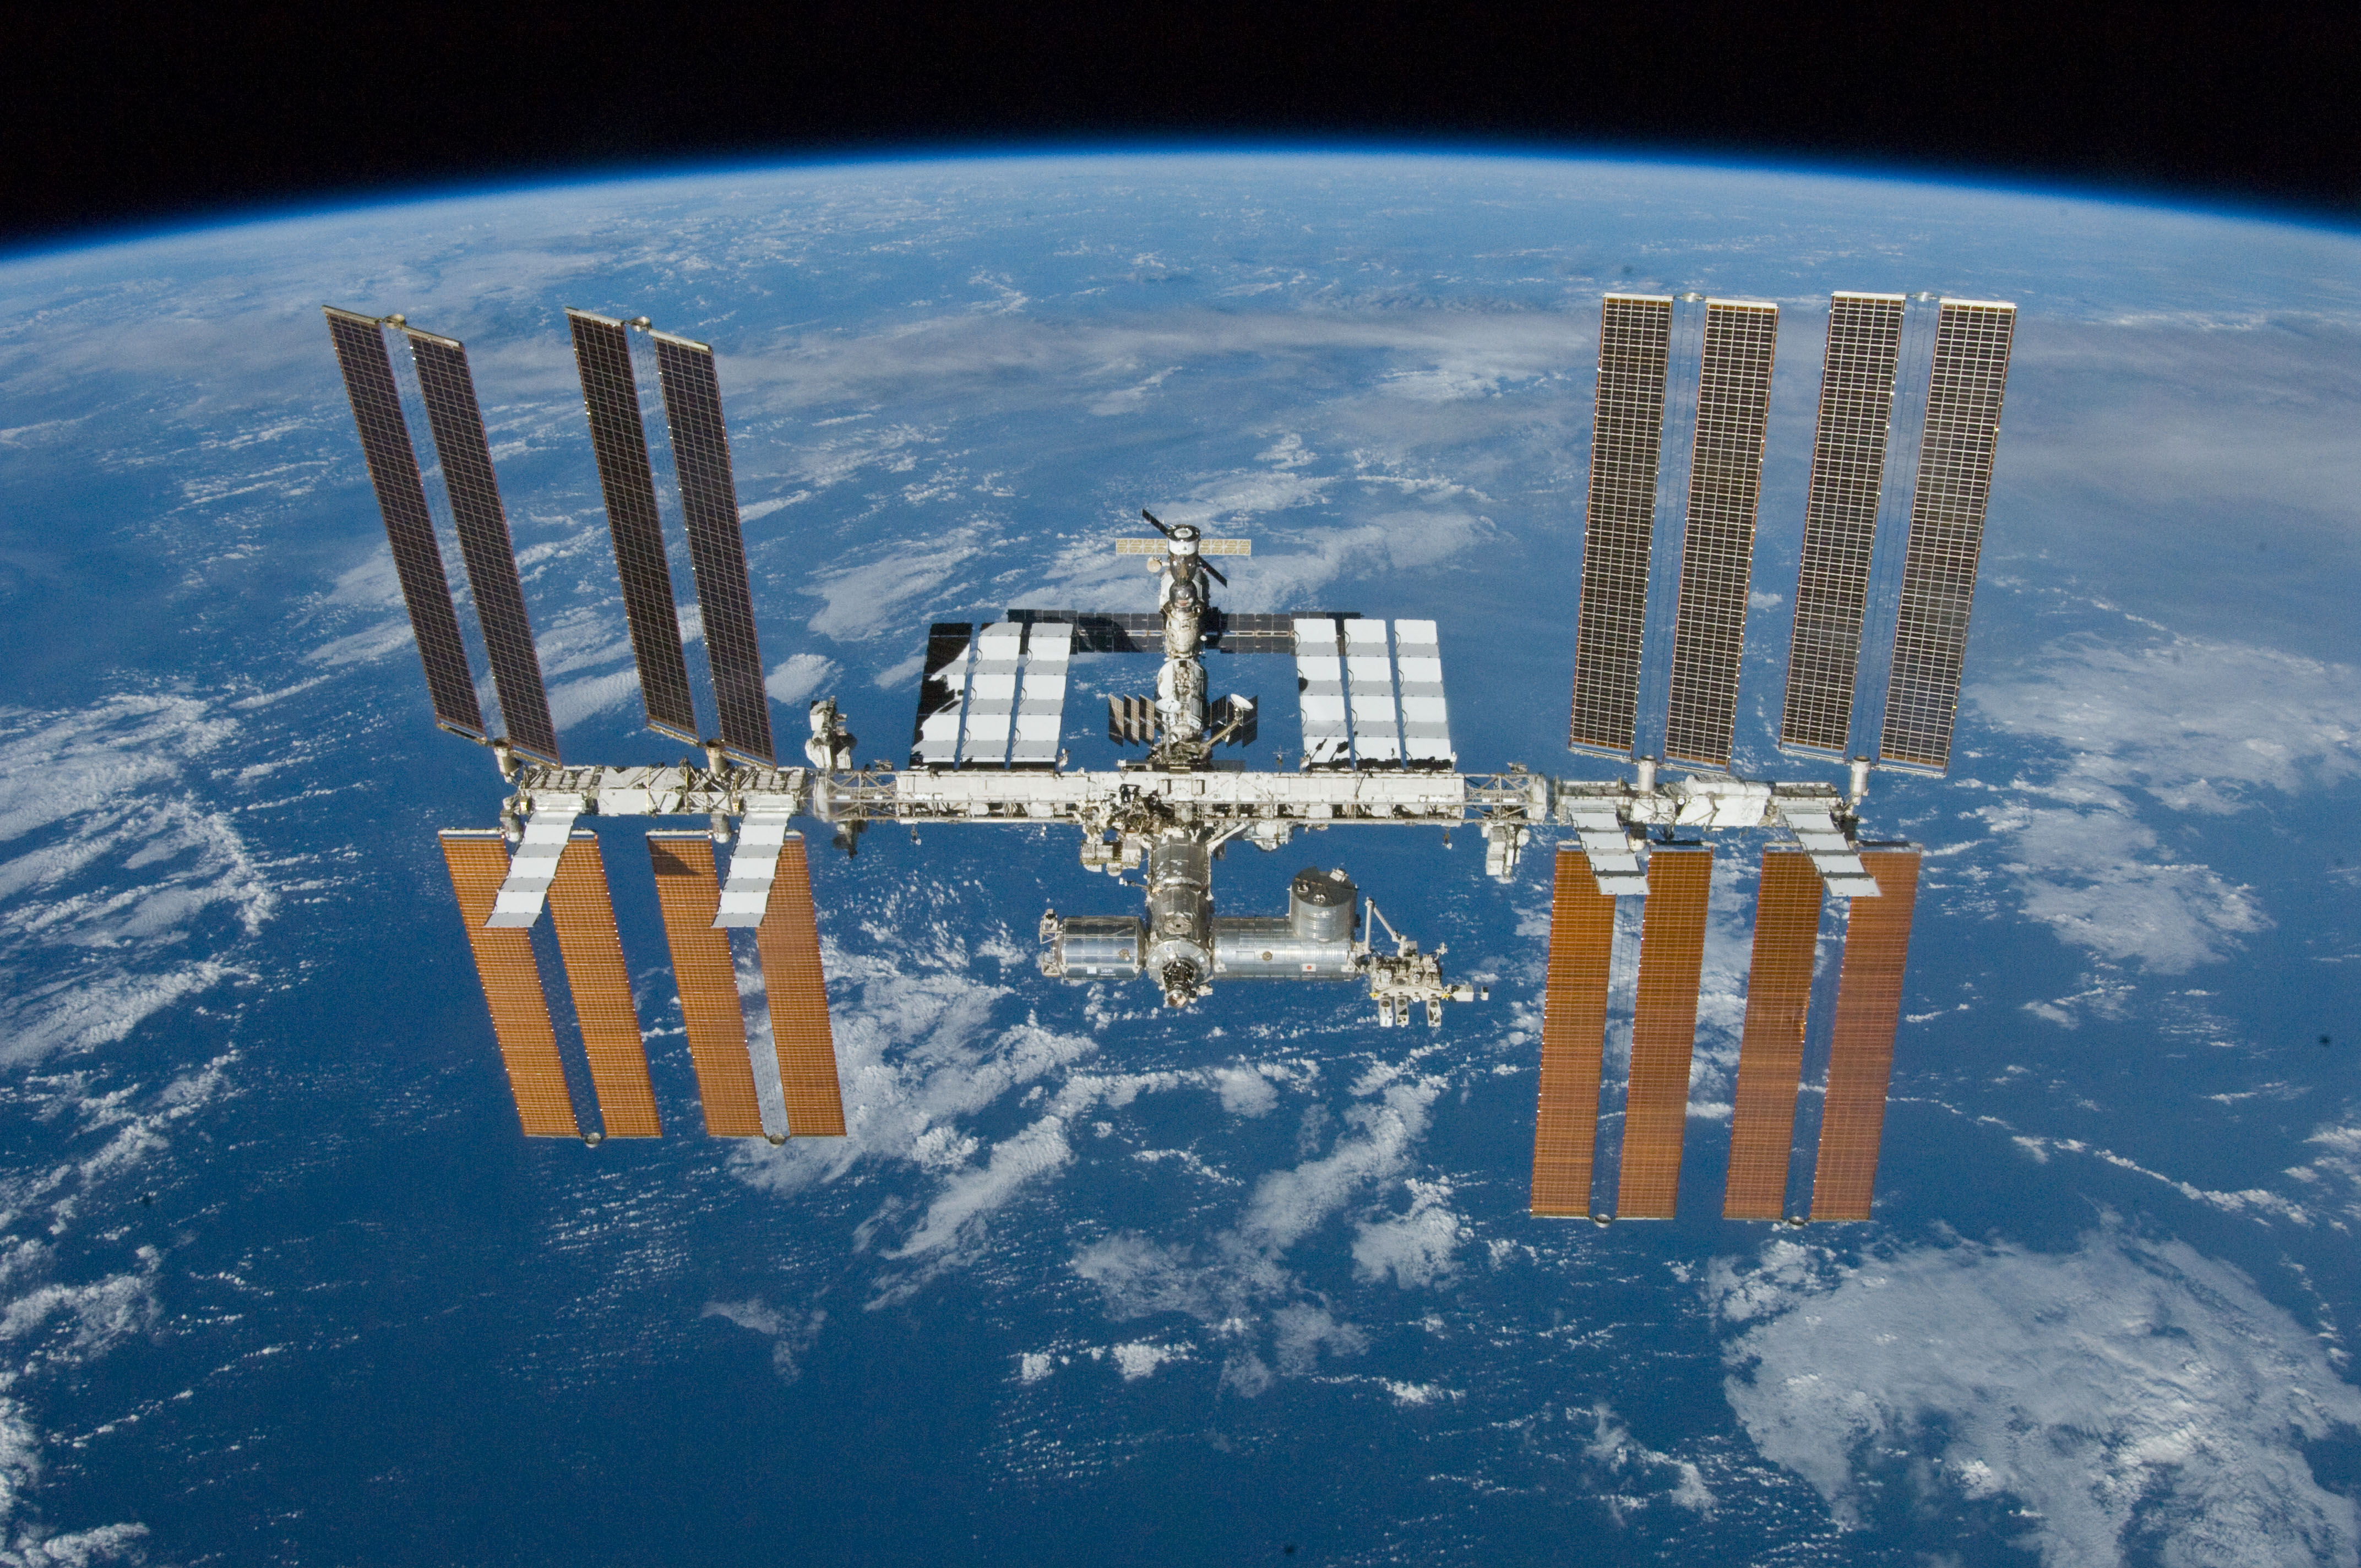 oseph McIntyre Ikerbasque Professor's experiments on board the International Space Station